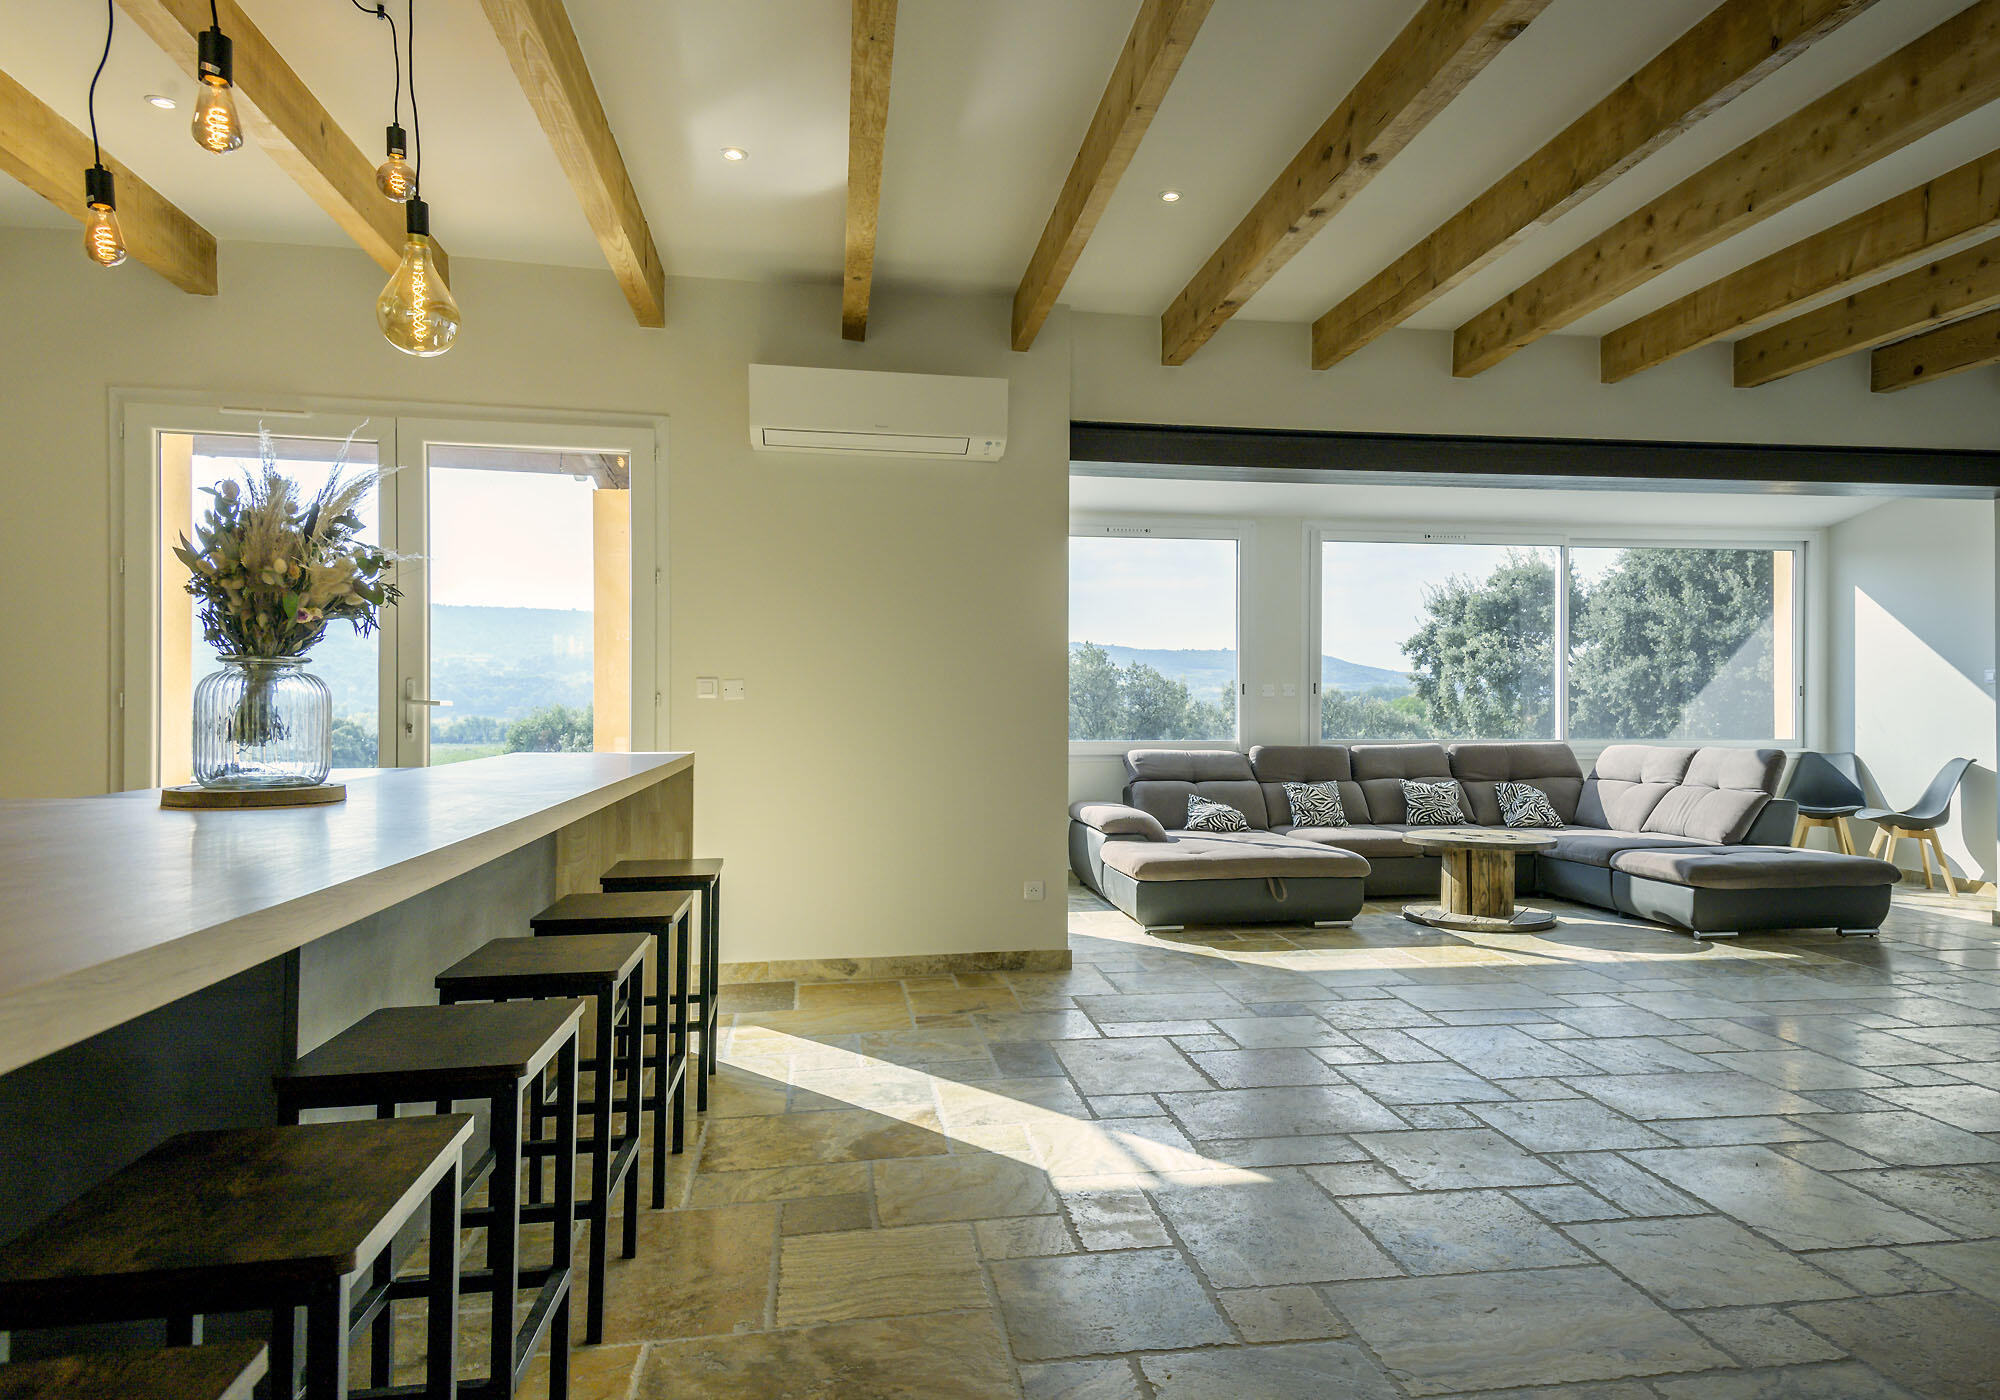 Traditional building materials with exposed beams